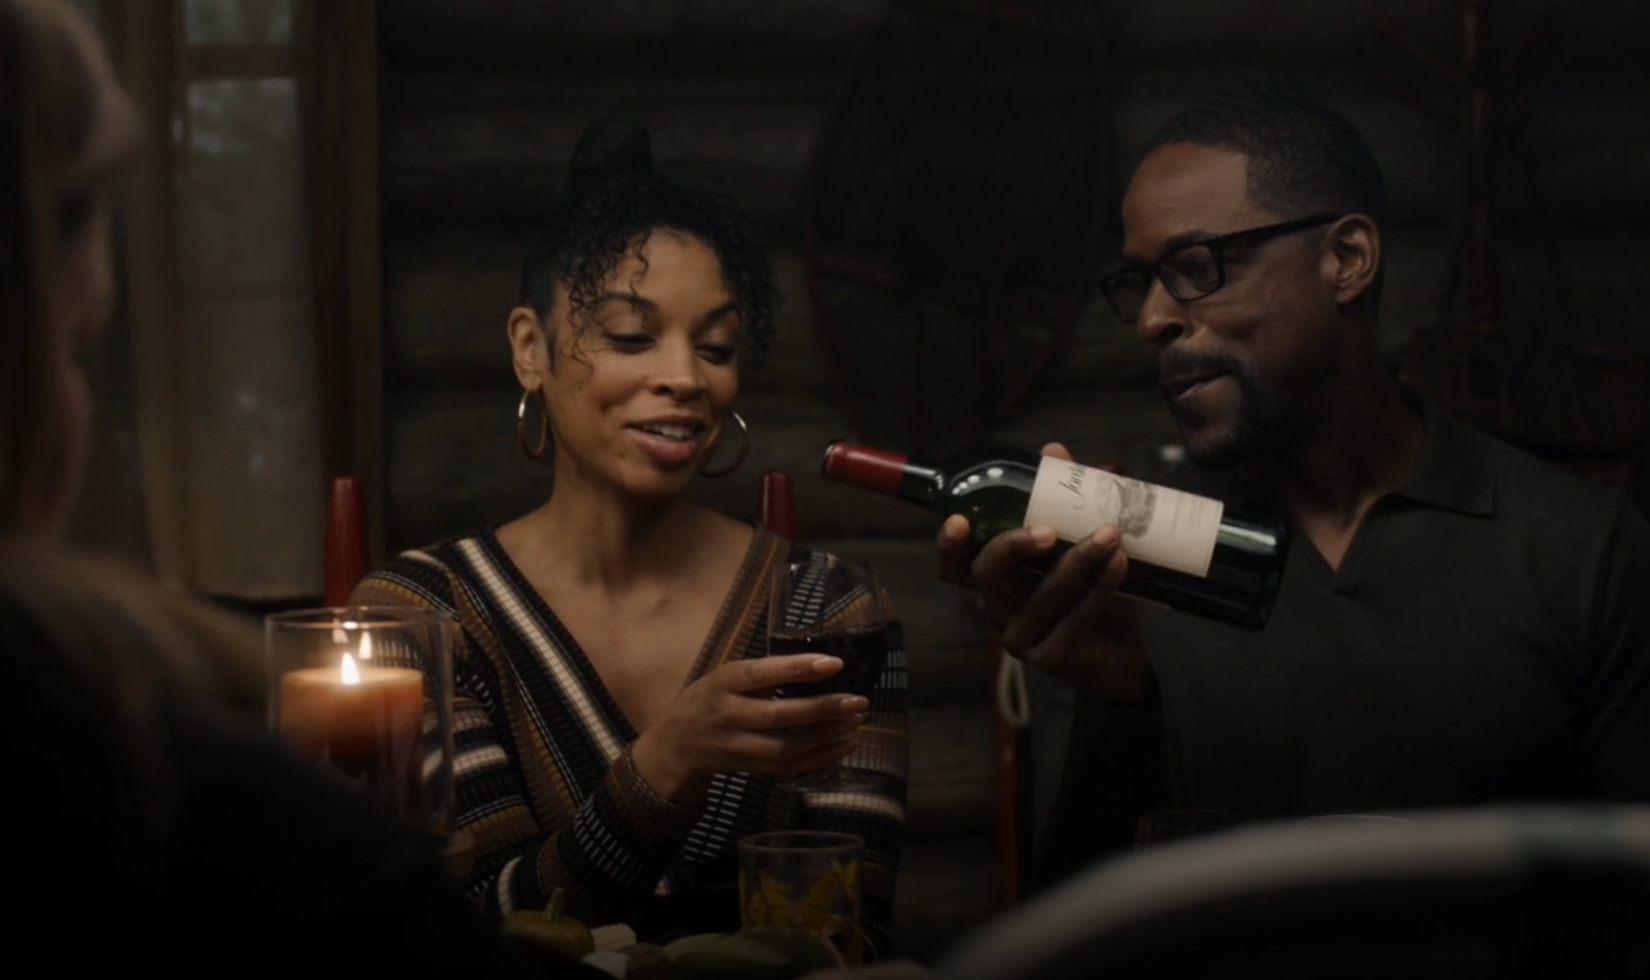 Screenshot from TV series This Is Us showing a man pouring a glass of Jordan Cabernet into a woman's glass